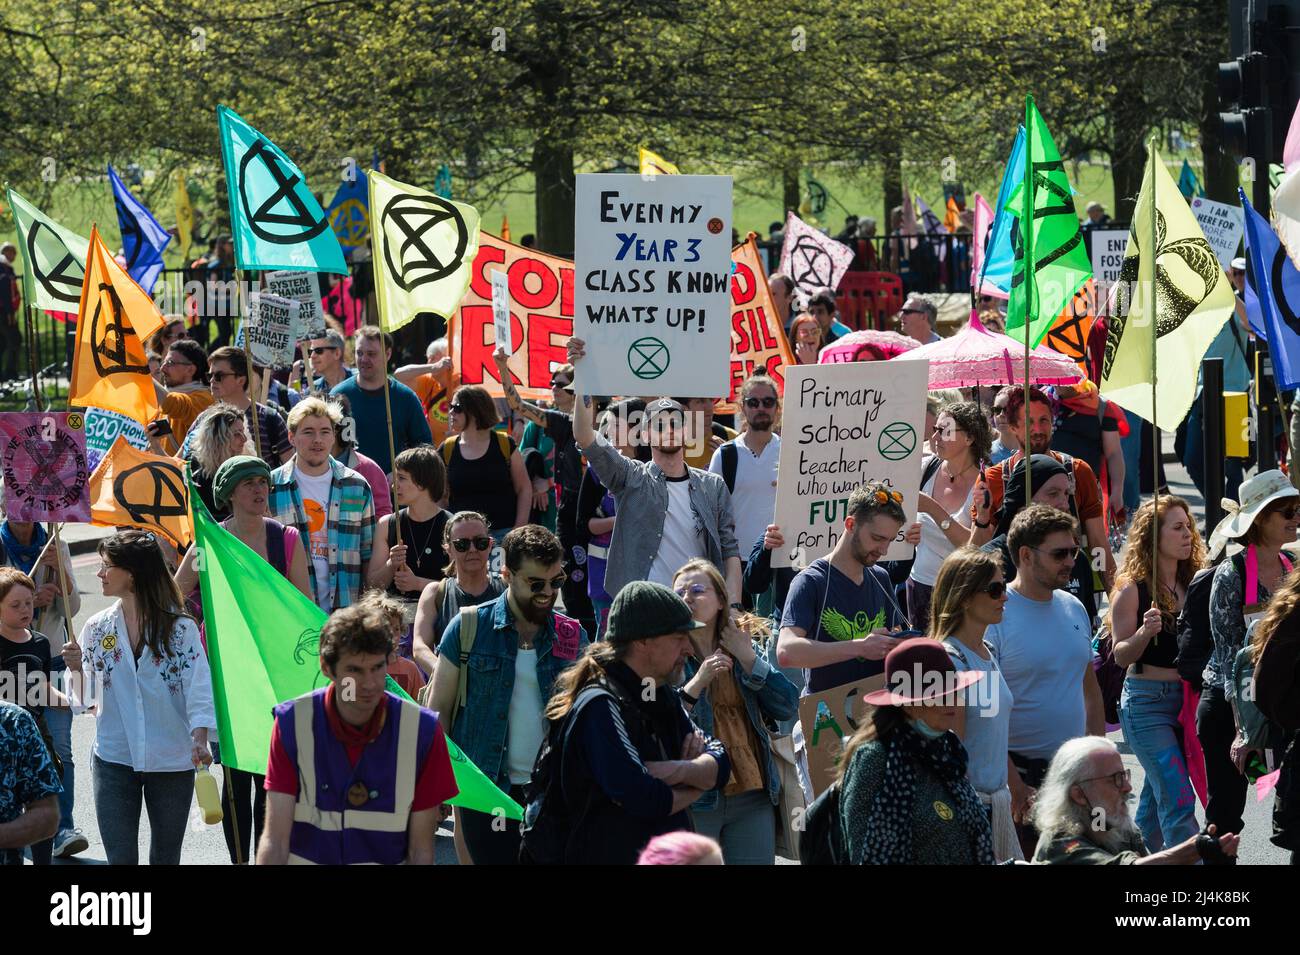 London, UK. 16th April, 2022. Activists from Extinction Rebellion from Hyde Park on the eight day of protests and civil disobedience actions to demand an immediate stop to all new fossil fuel infrastructure by the British government amid climate crisis and ecological emergency. Credit: Wiktor Szymanowicz/Alamy Live News Stock Photo